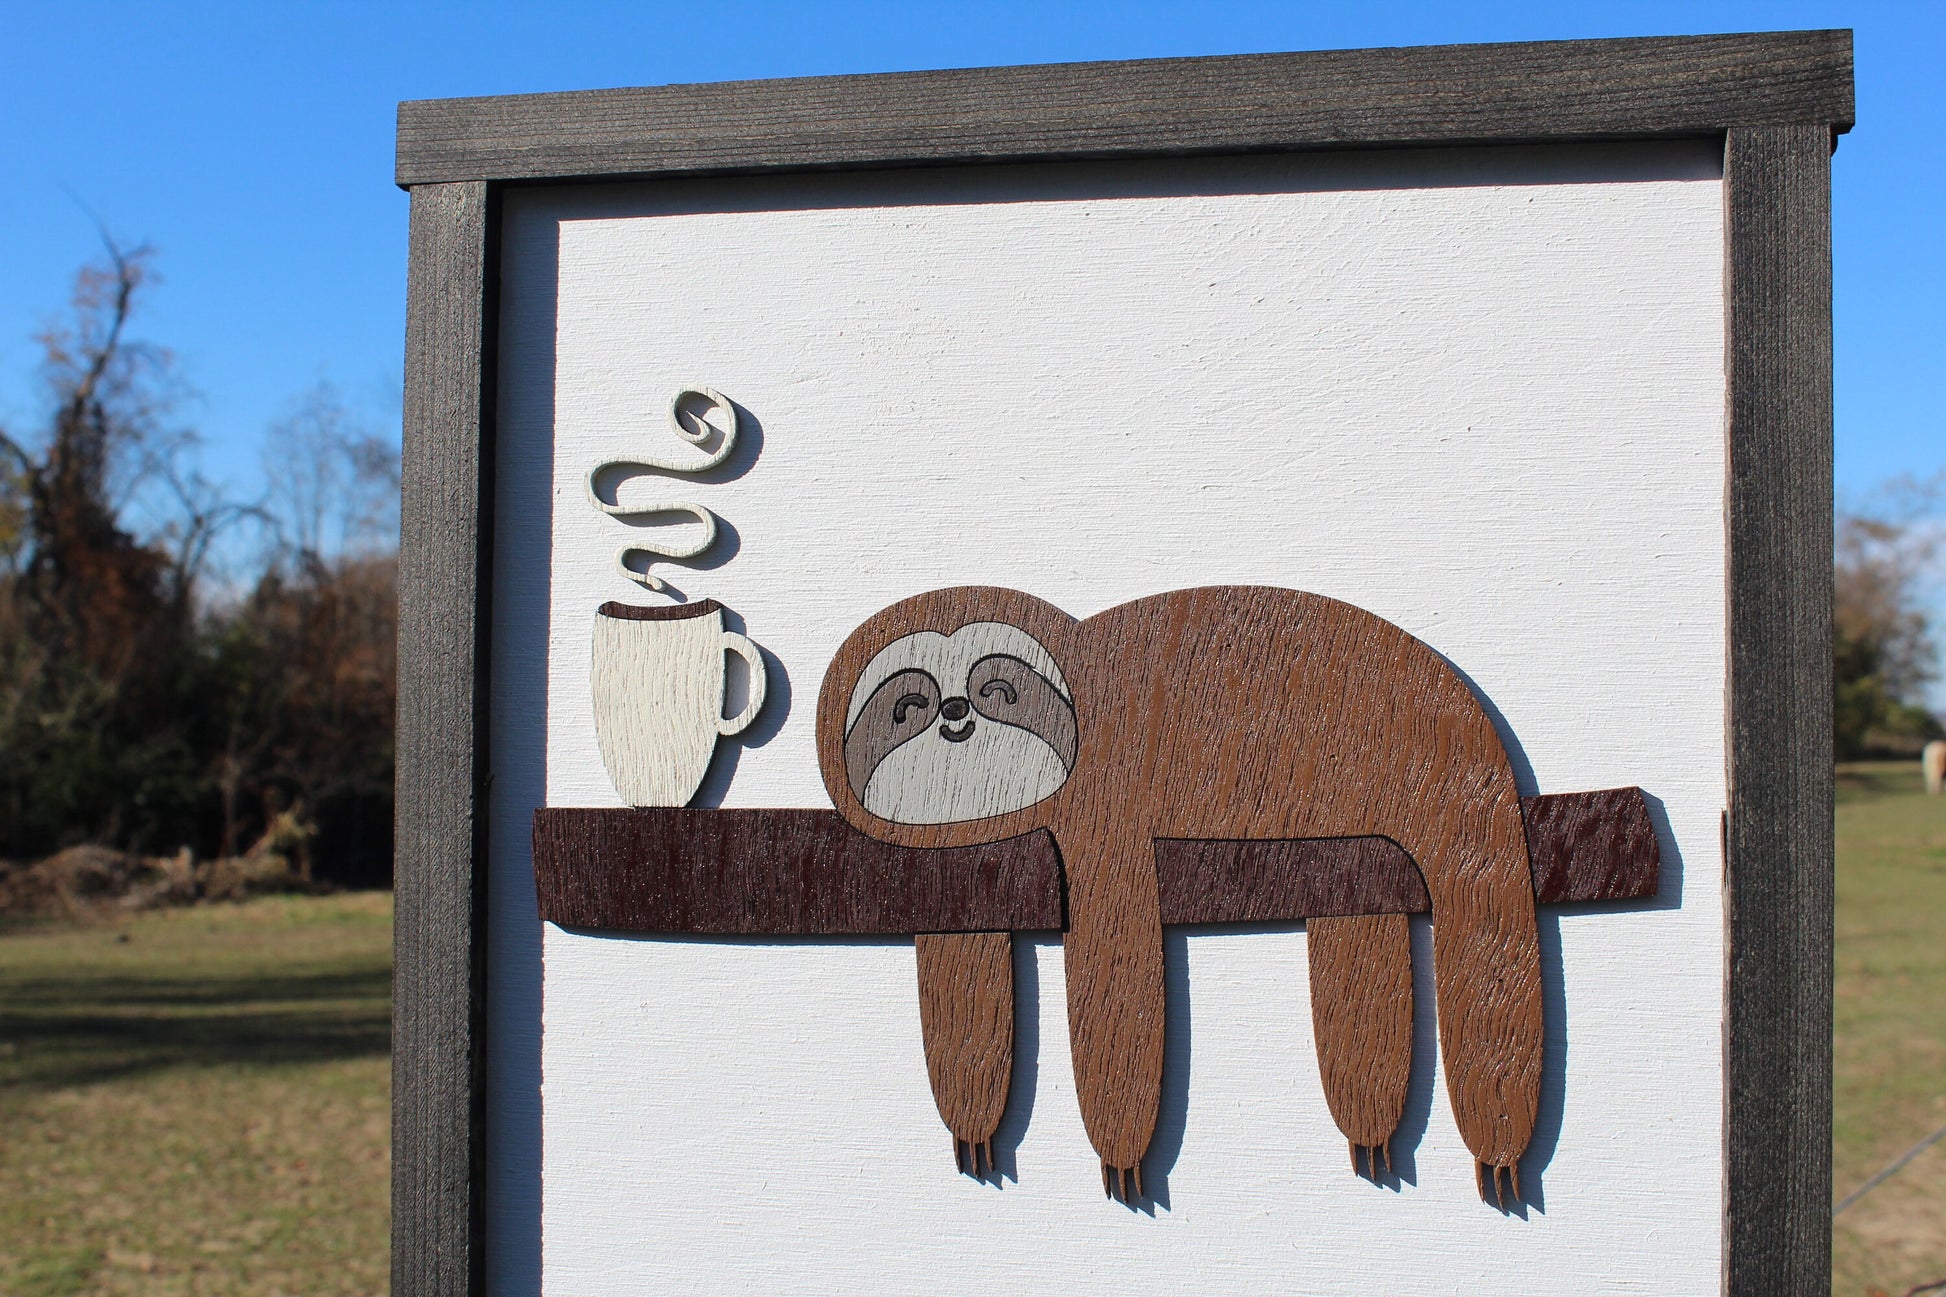 Tired Sloth Drinking Coffee 3D Raised Image Wood Sign Country Primitive Wall Decoration Passed Out Hot Chocolate Energy Sleepy Décor